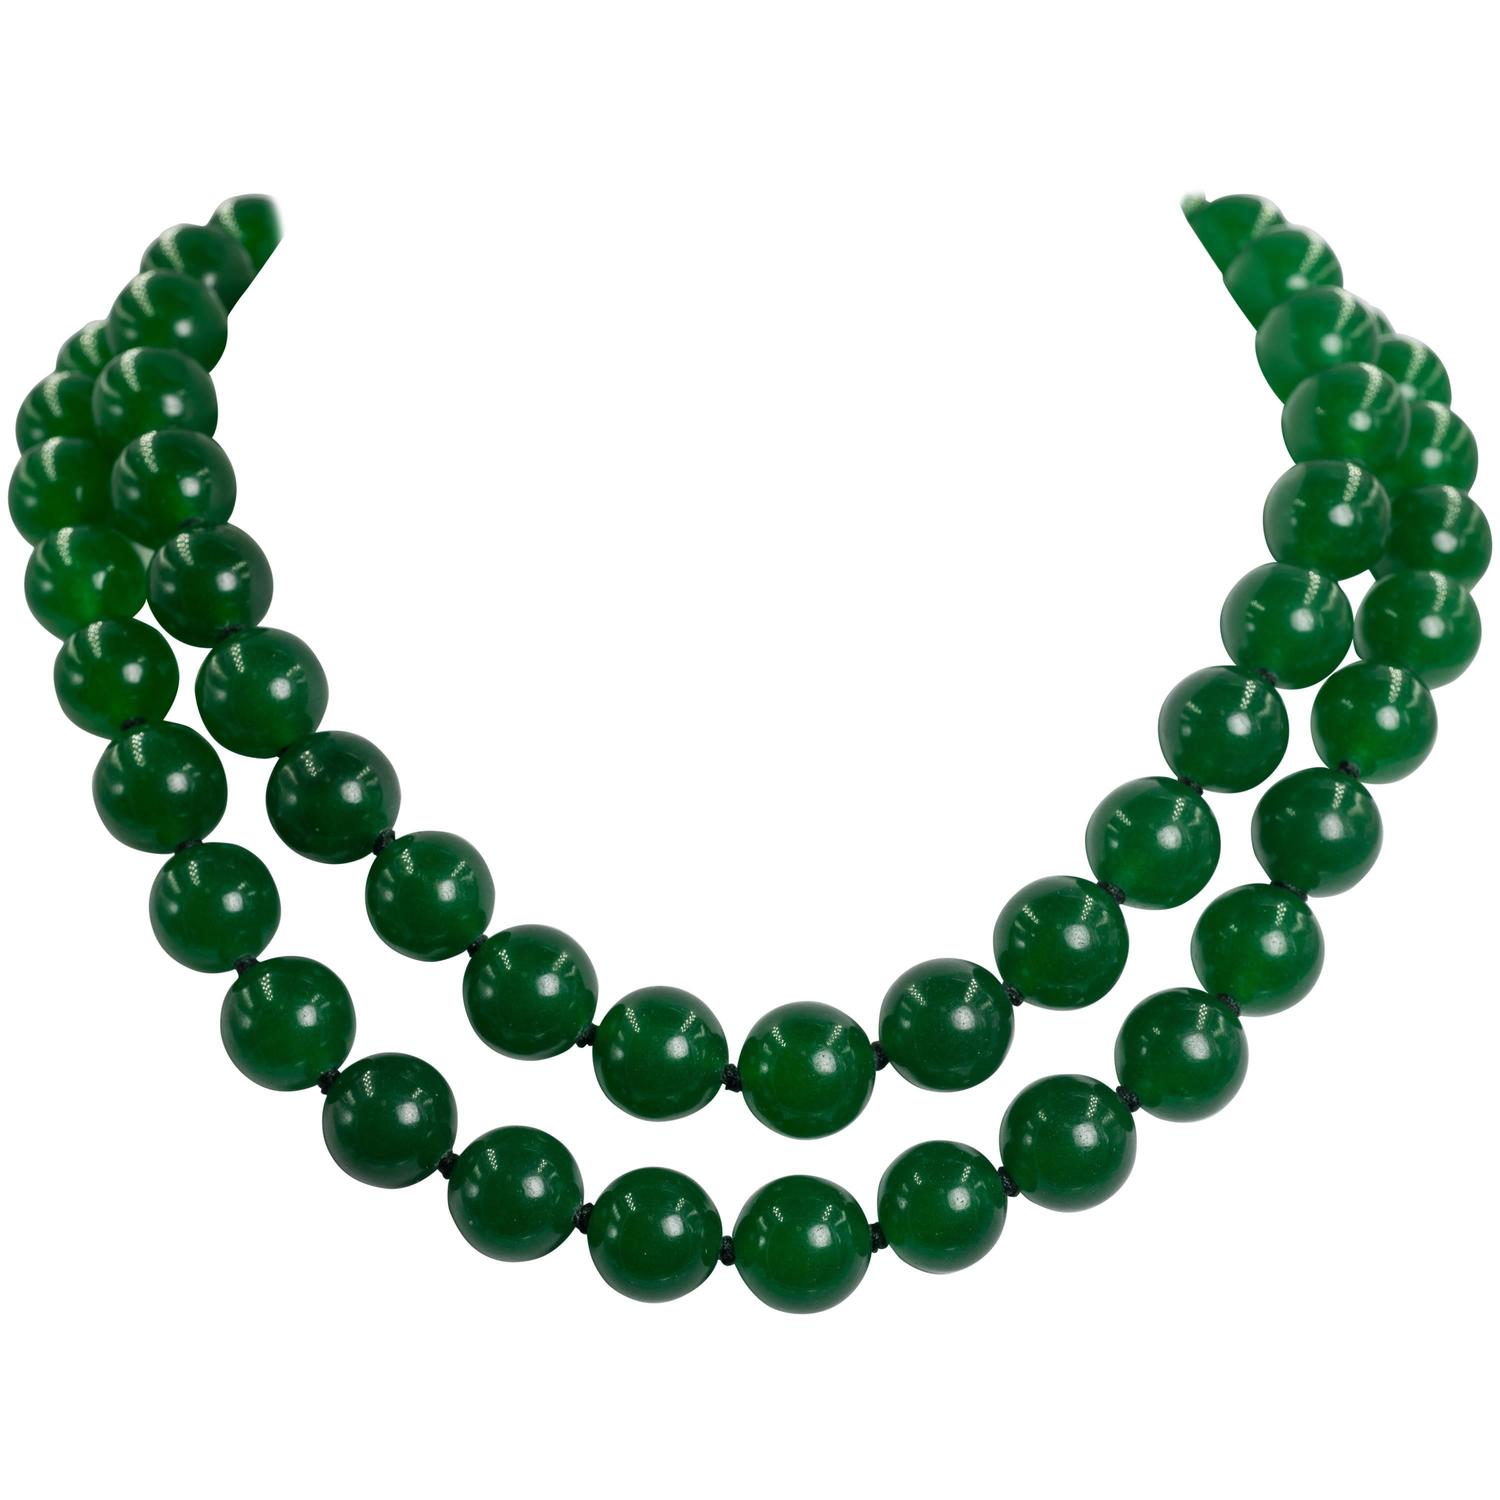 Elegant Two Strand Faux Imperial Jade Bead Necklace At 1stdibs | Free ...